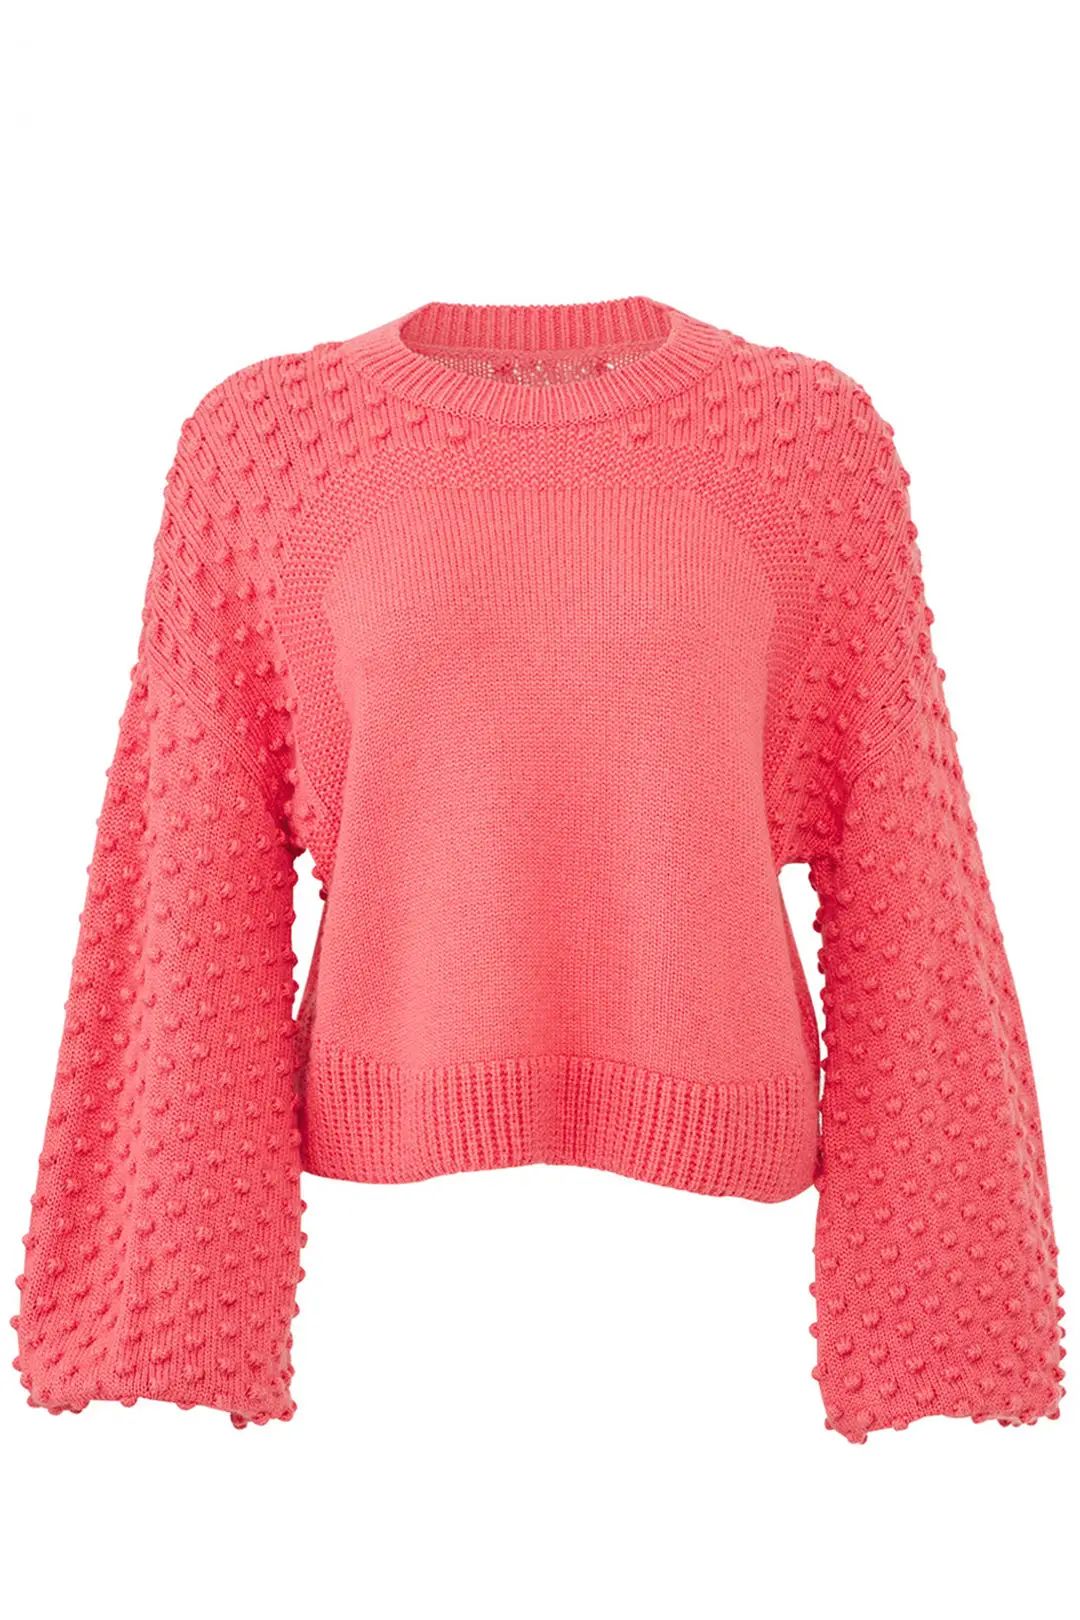 (nude) Pink Pom Sleeve Sweater | Rent The Runway